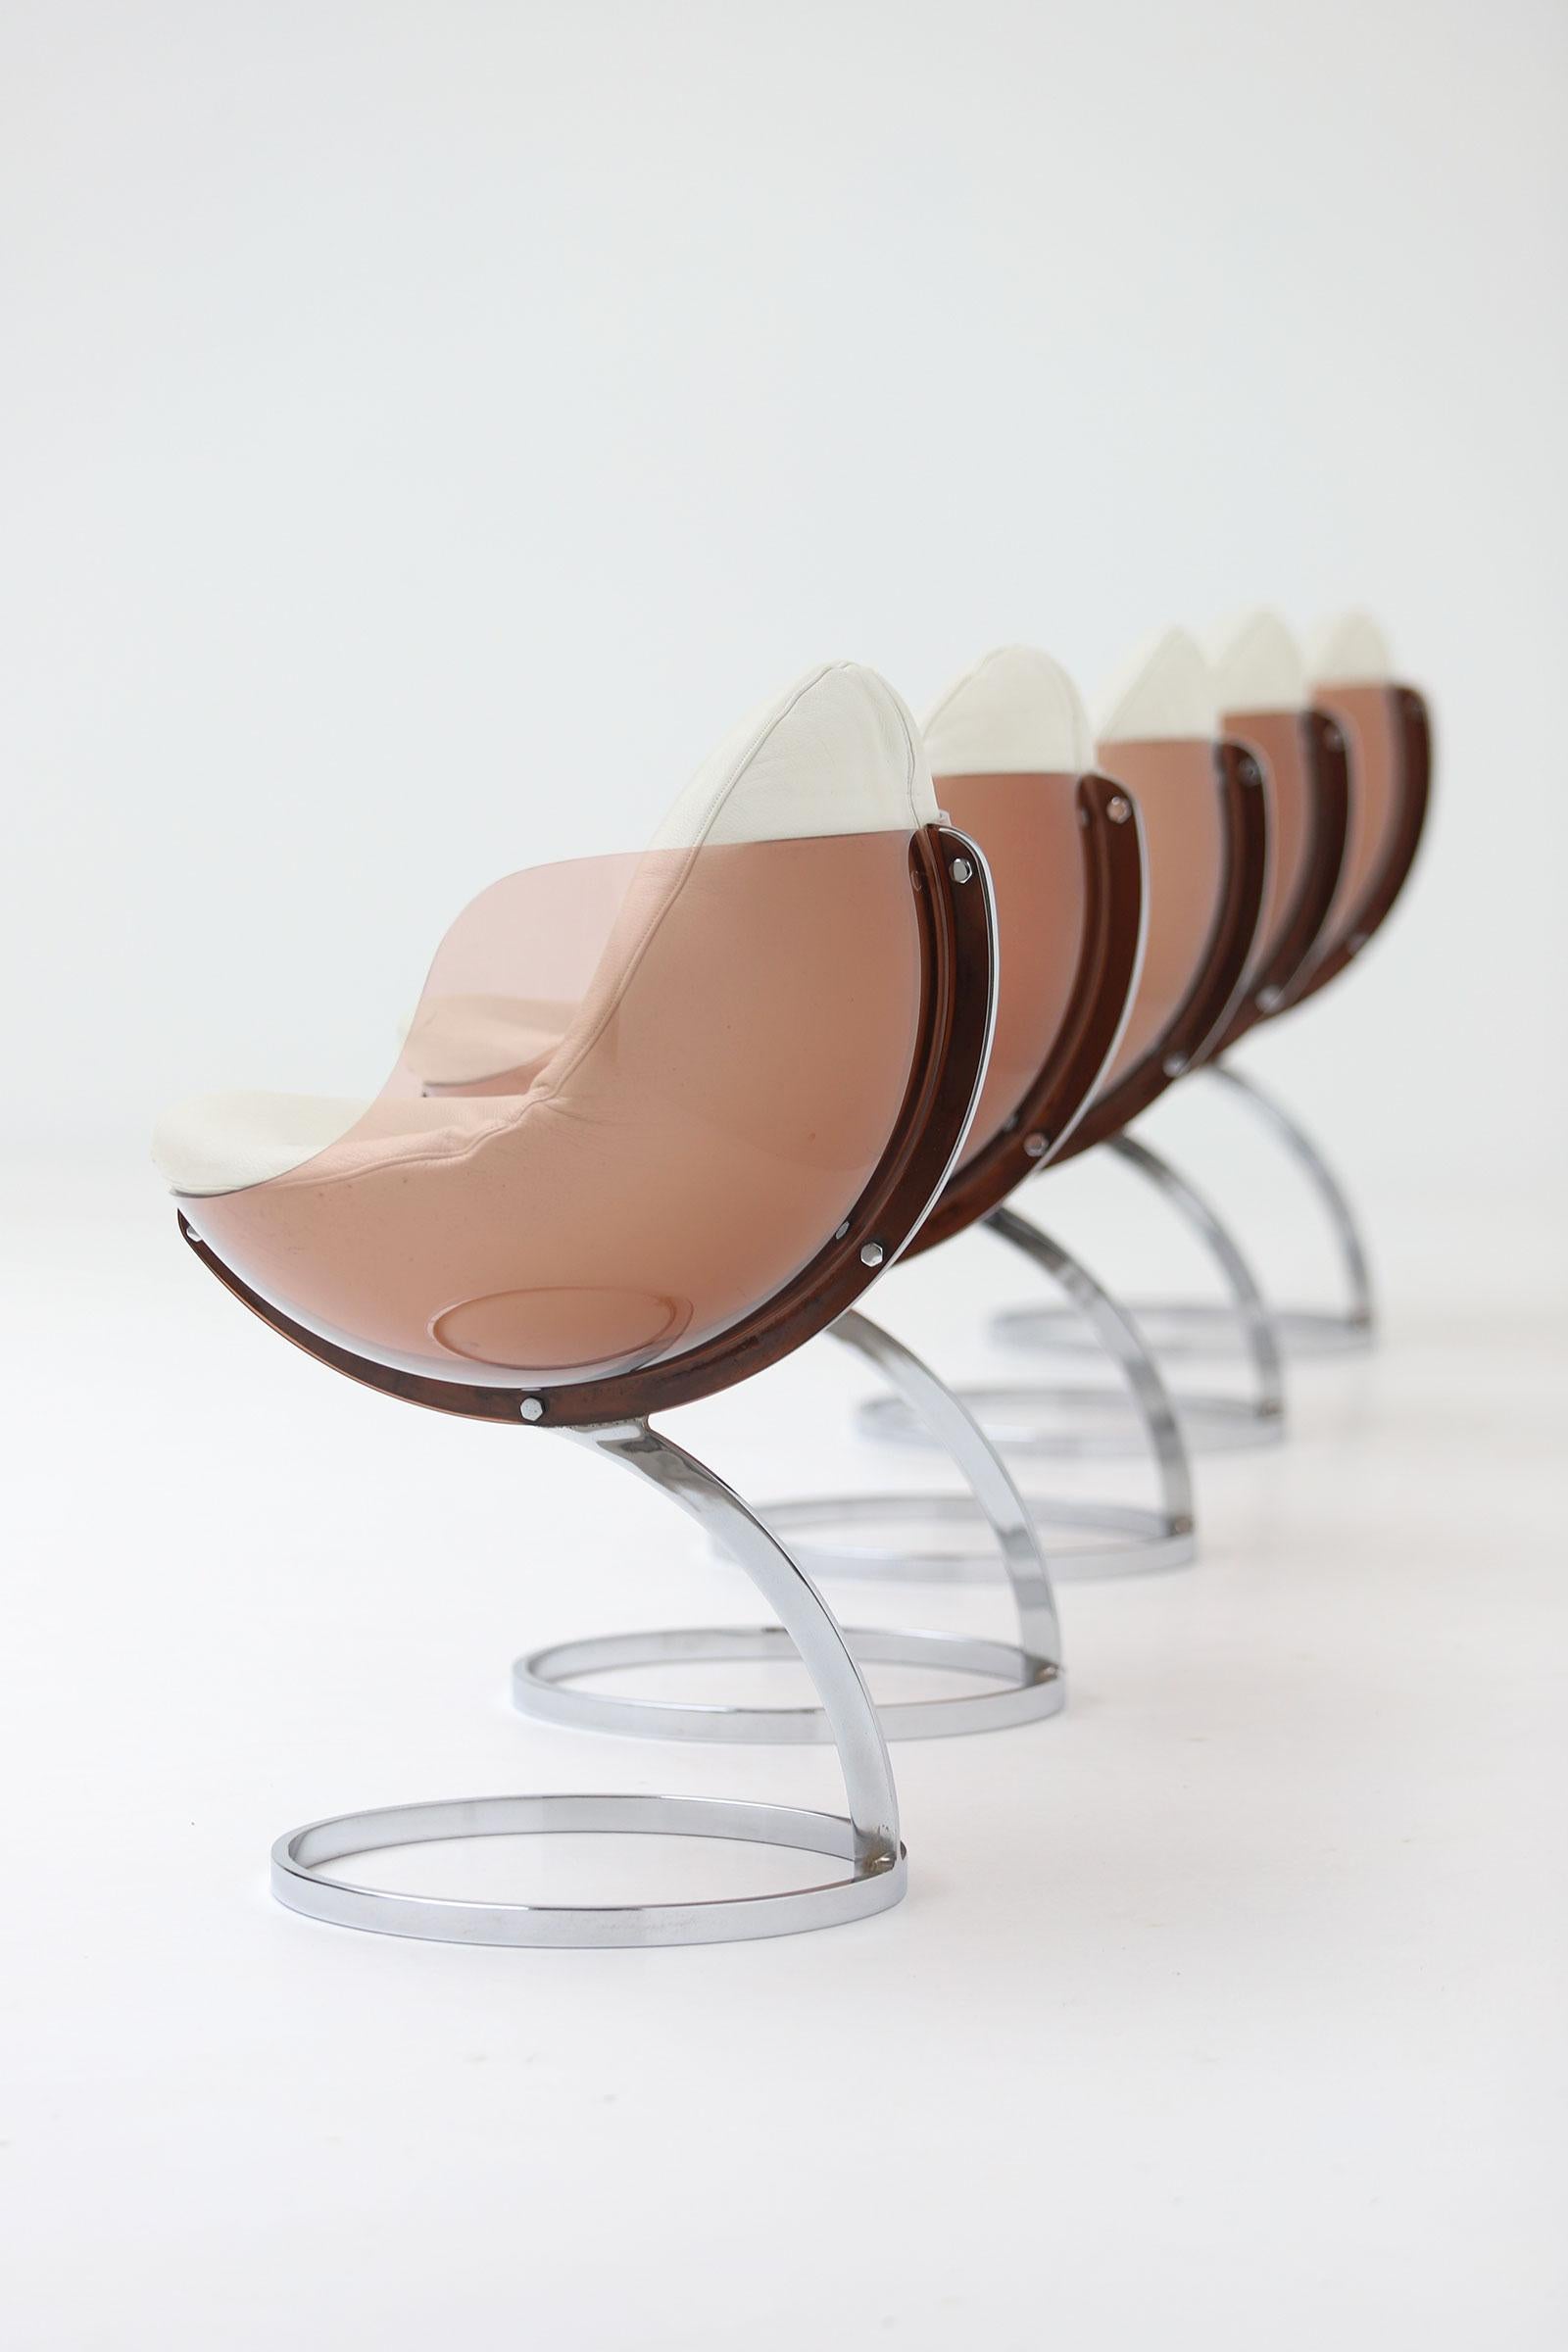 Set of 5 Sphere Chairs Designed by Boris Tabacoff, 1971 2